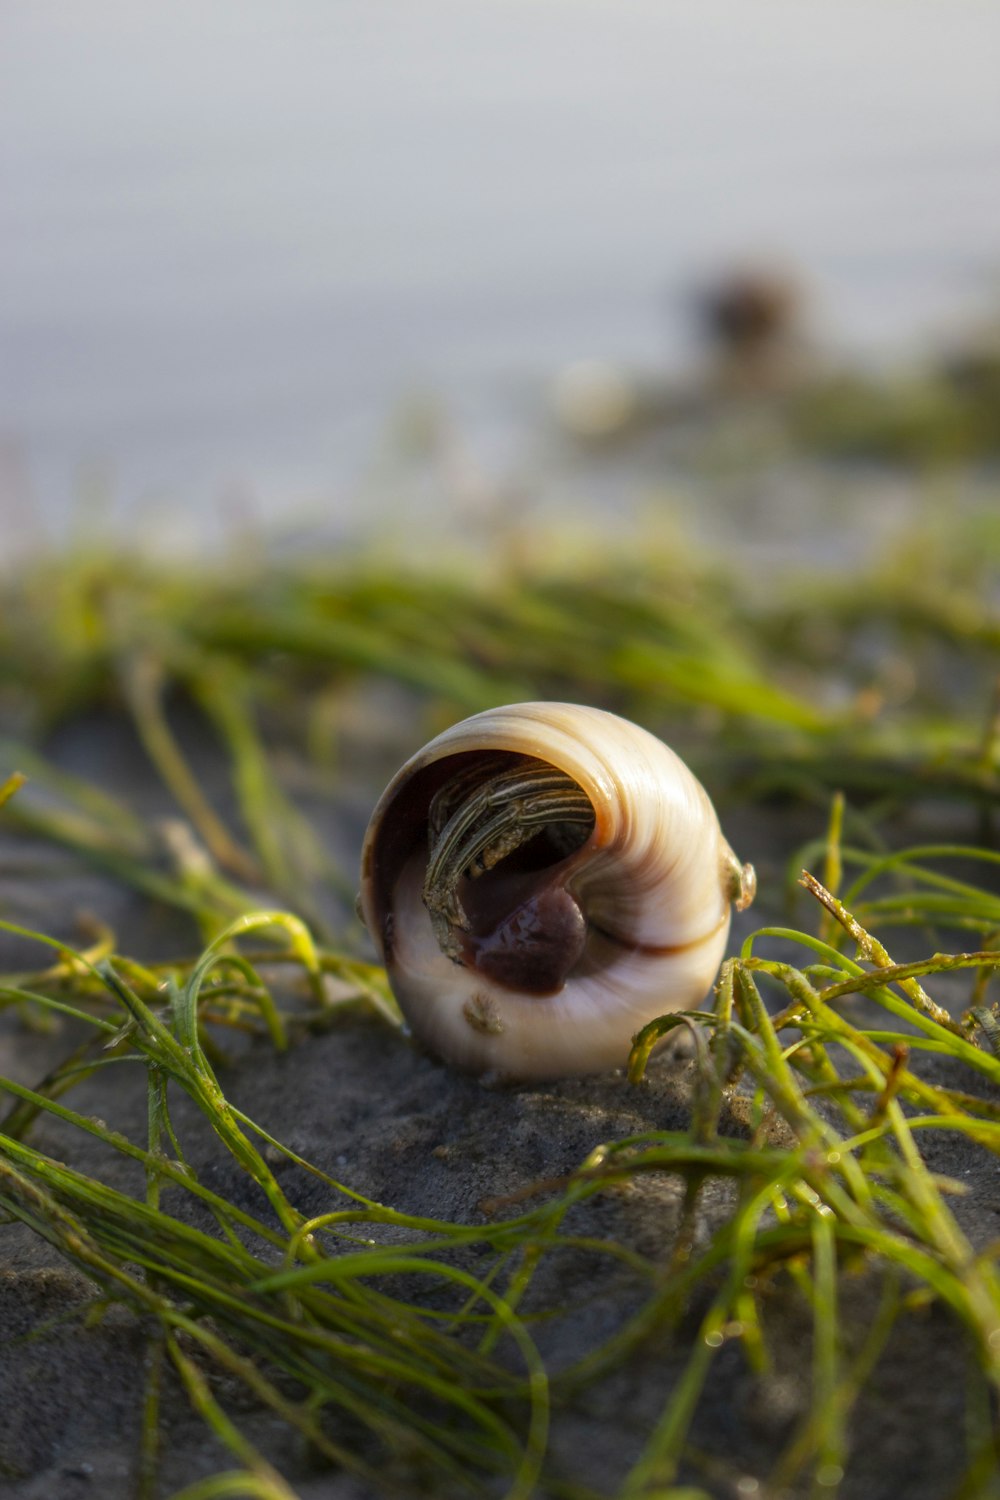 white and brown snail on green grass during daytime